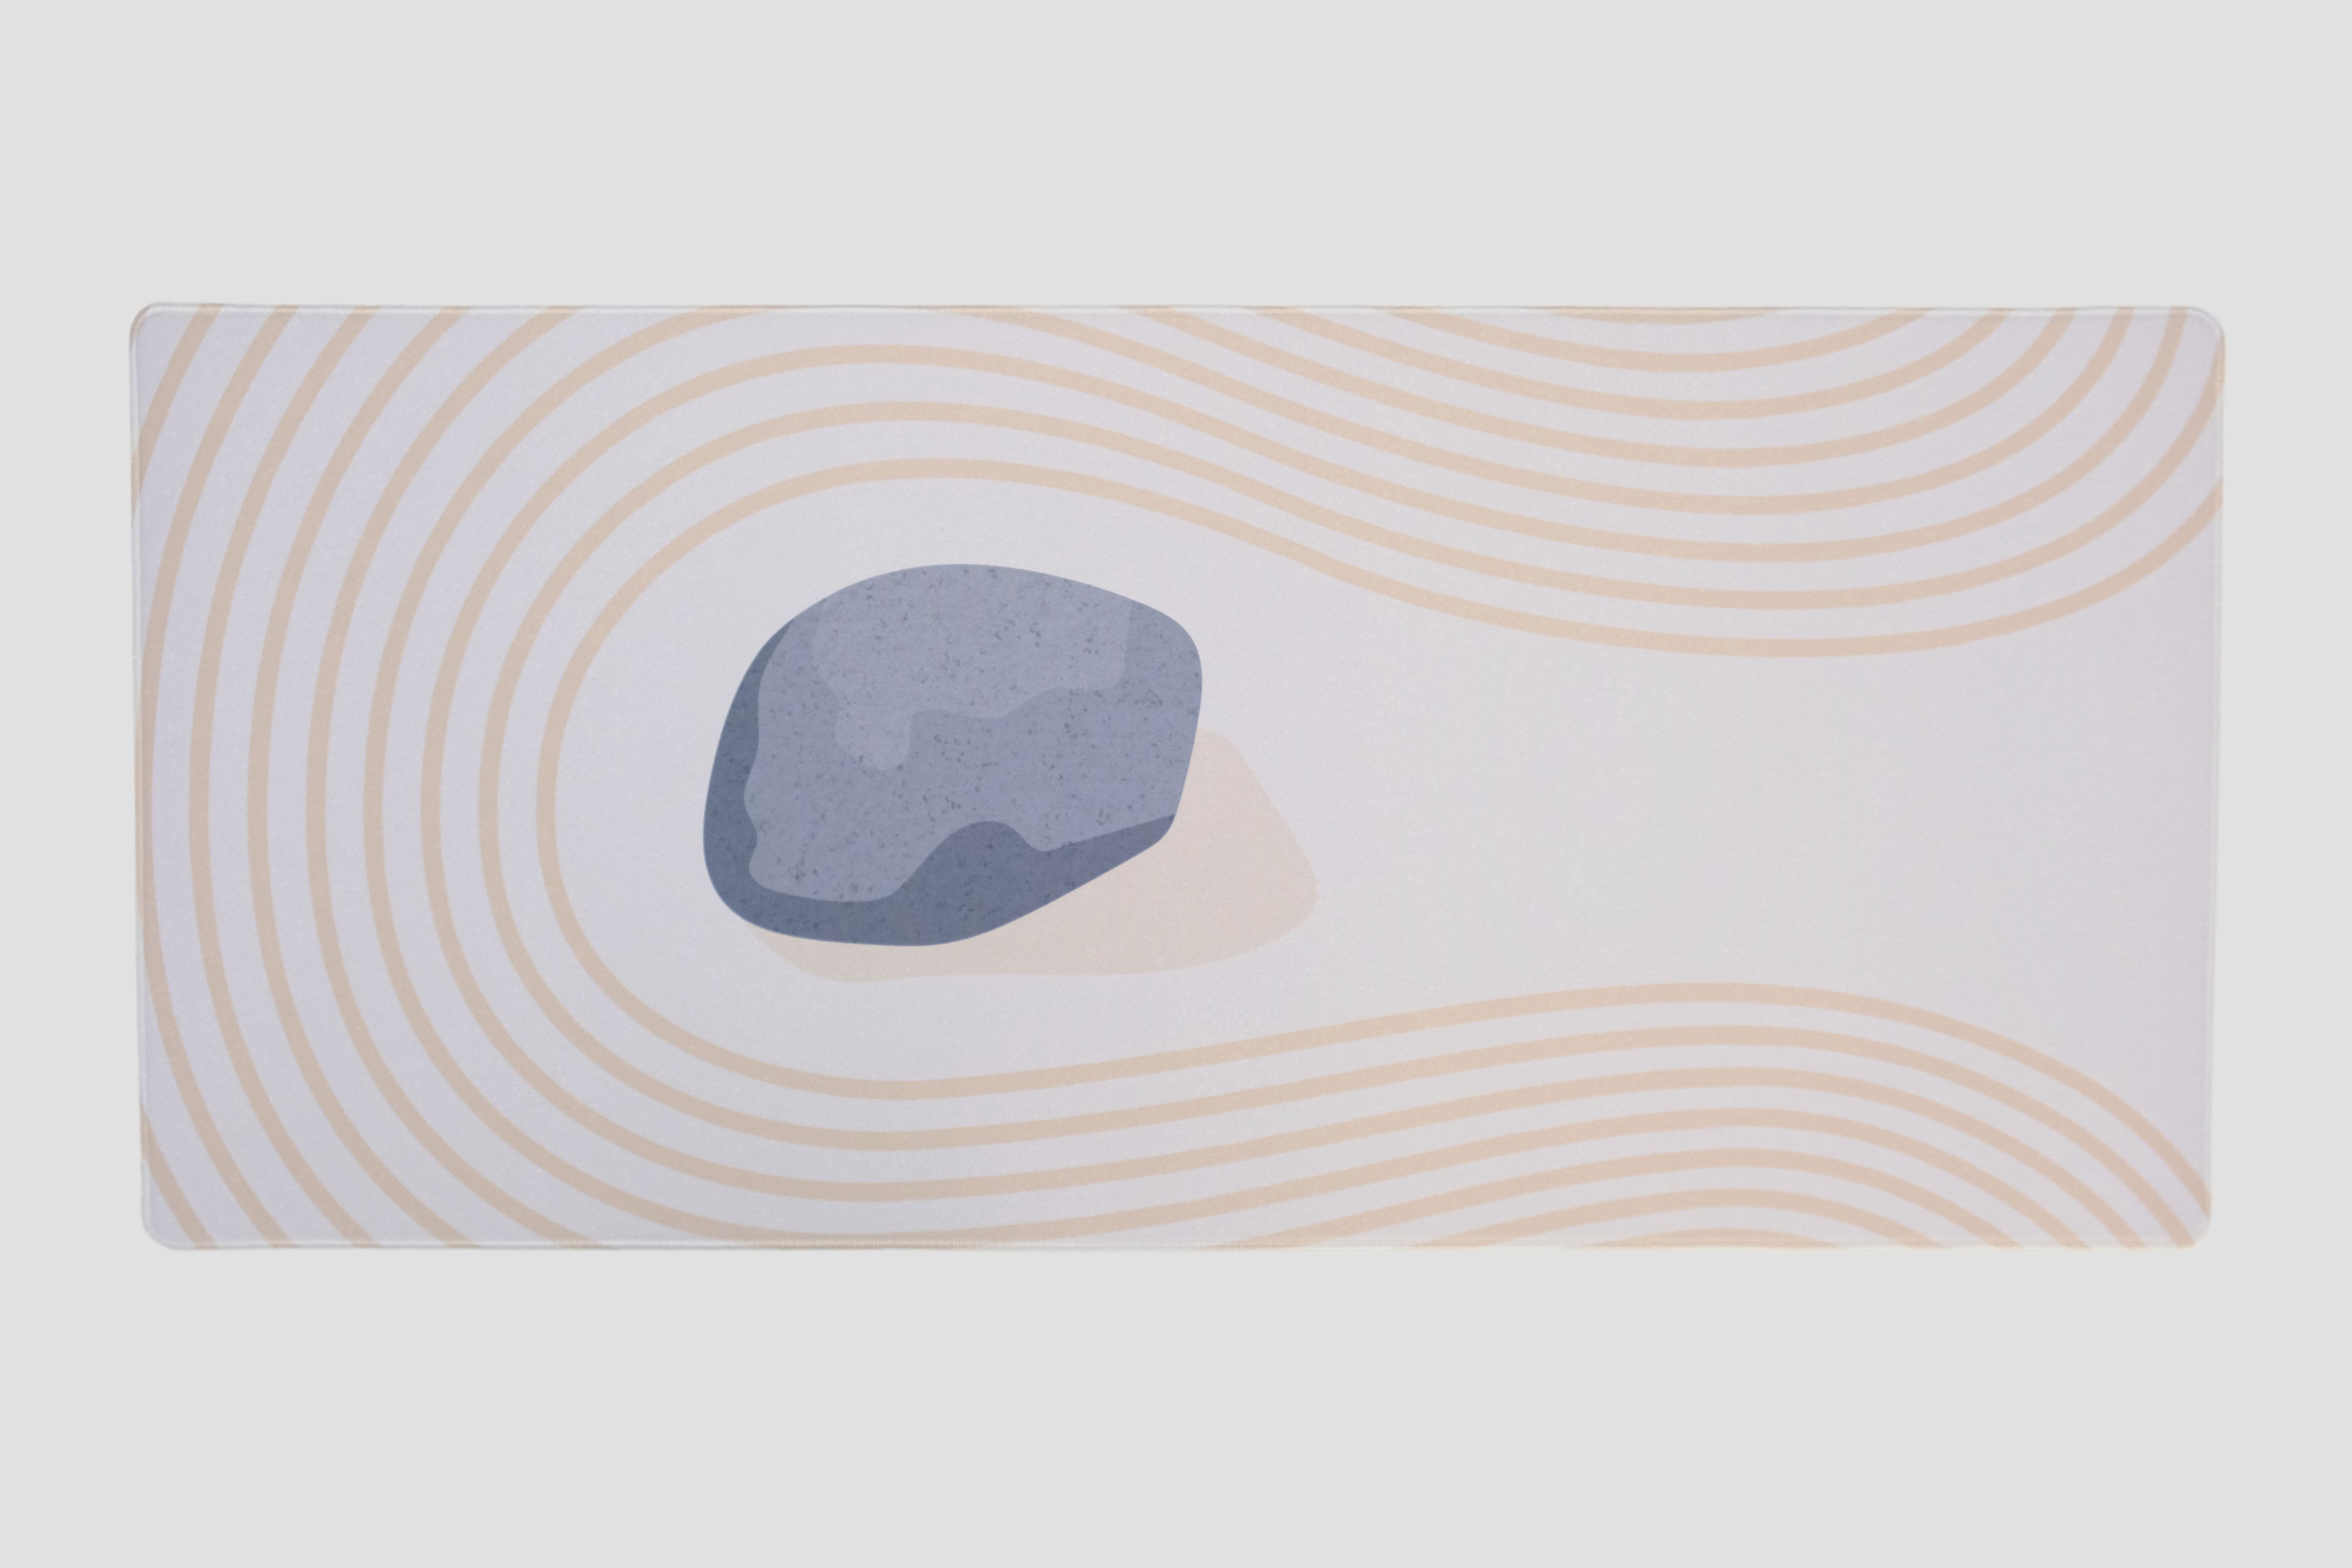 Zen Deskmats by KeebsForAll. Stone variant